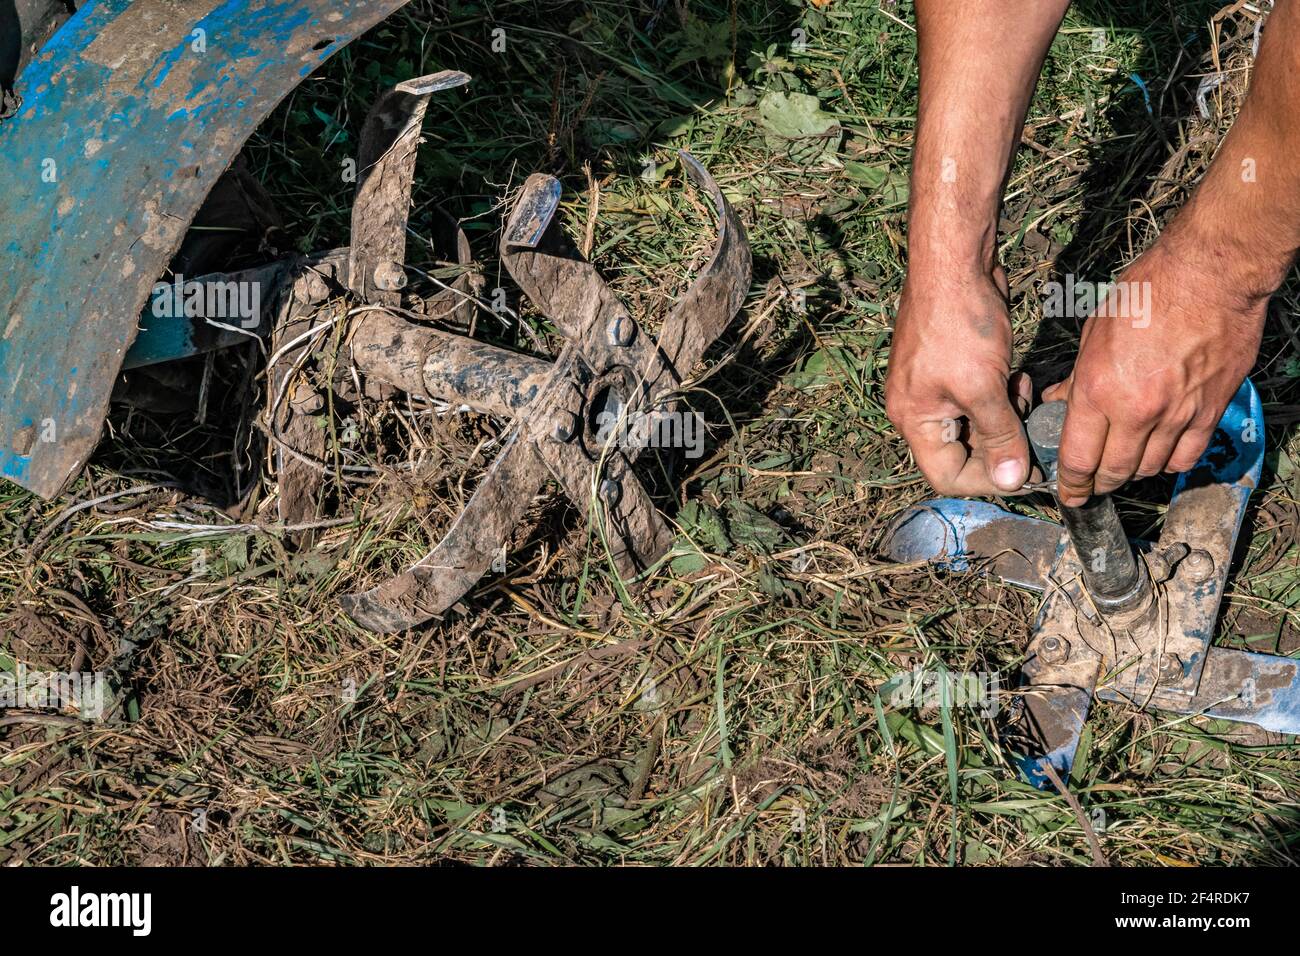 An unrecognizable farmer repairs a hand-held motor plow. Agricultural machinery: cultivator for tillage in the garden, motorized hand plow. Authentic Stock Photo